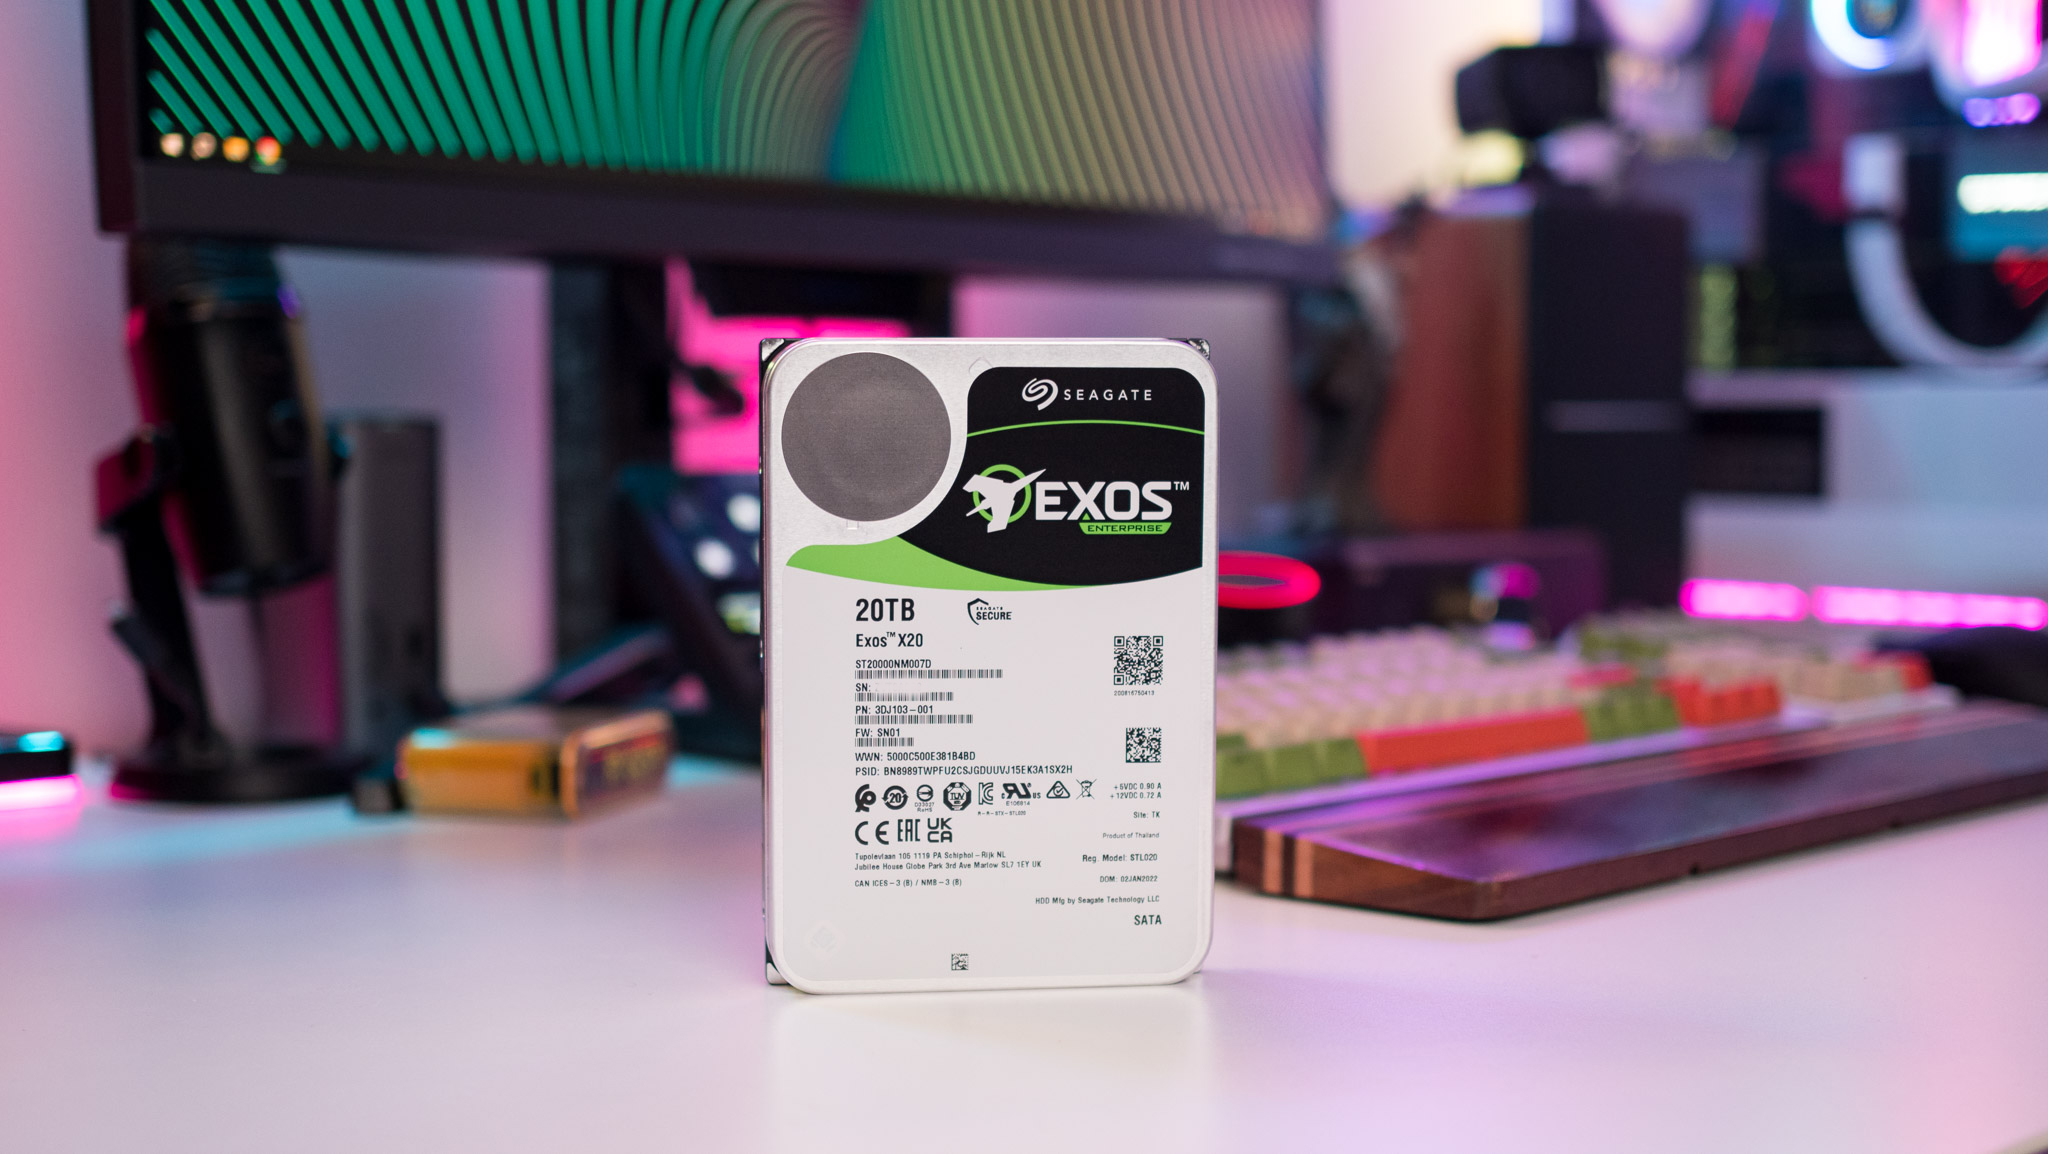 Review: Seagate's 20TB Exos X20 is my favorite NAS hard